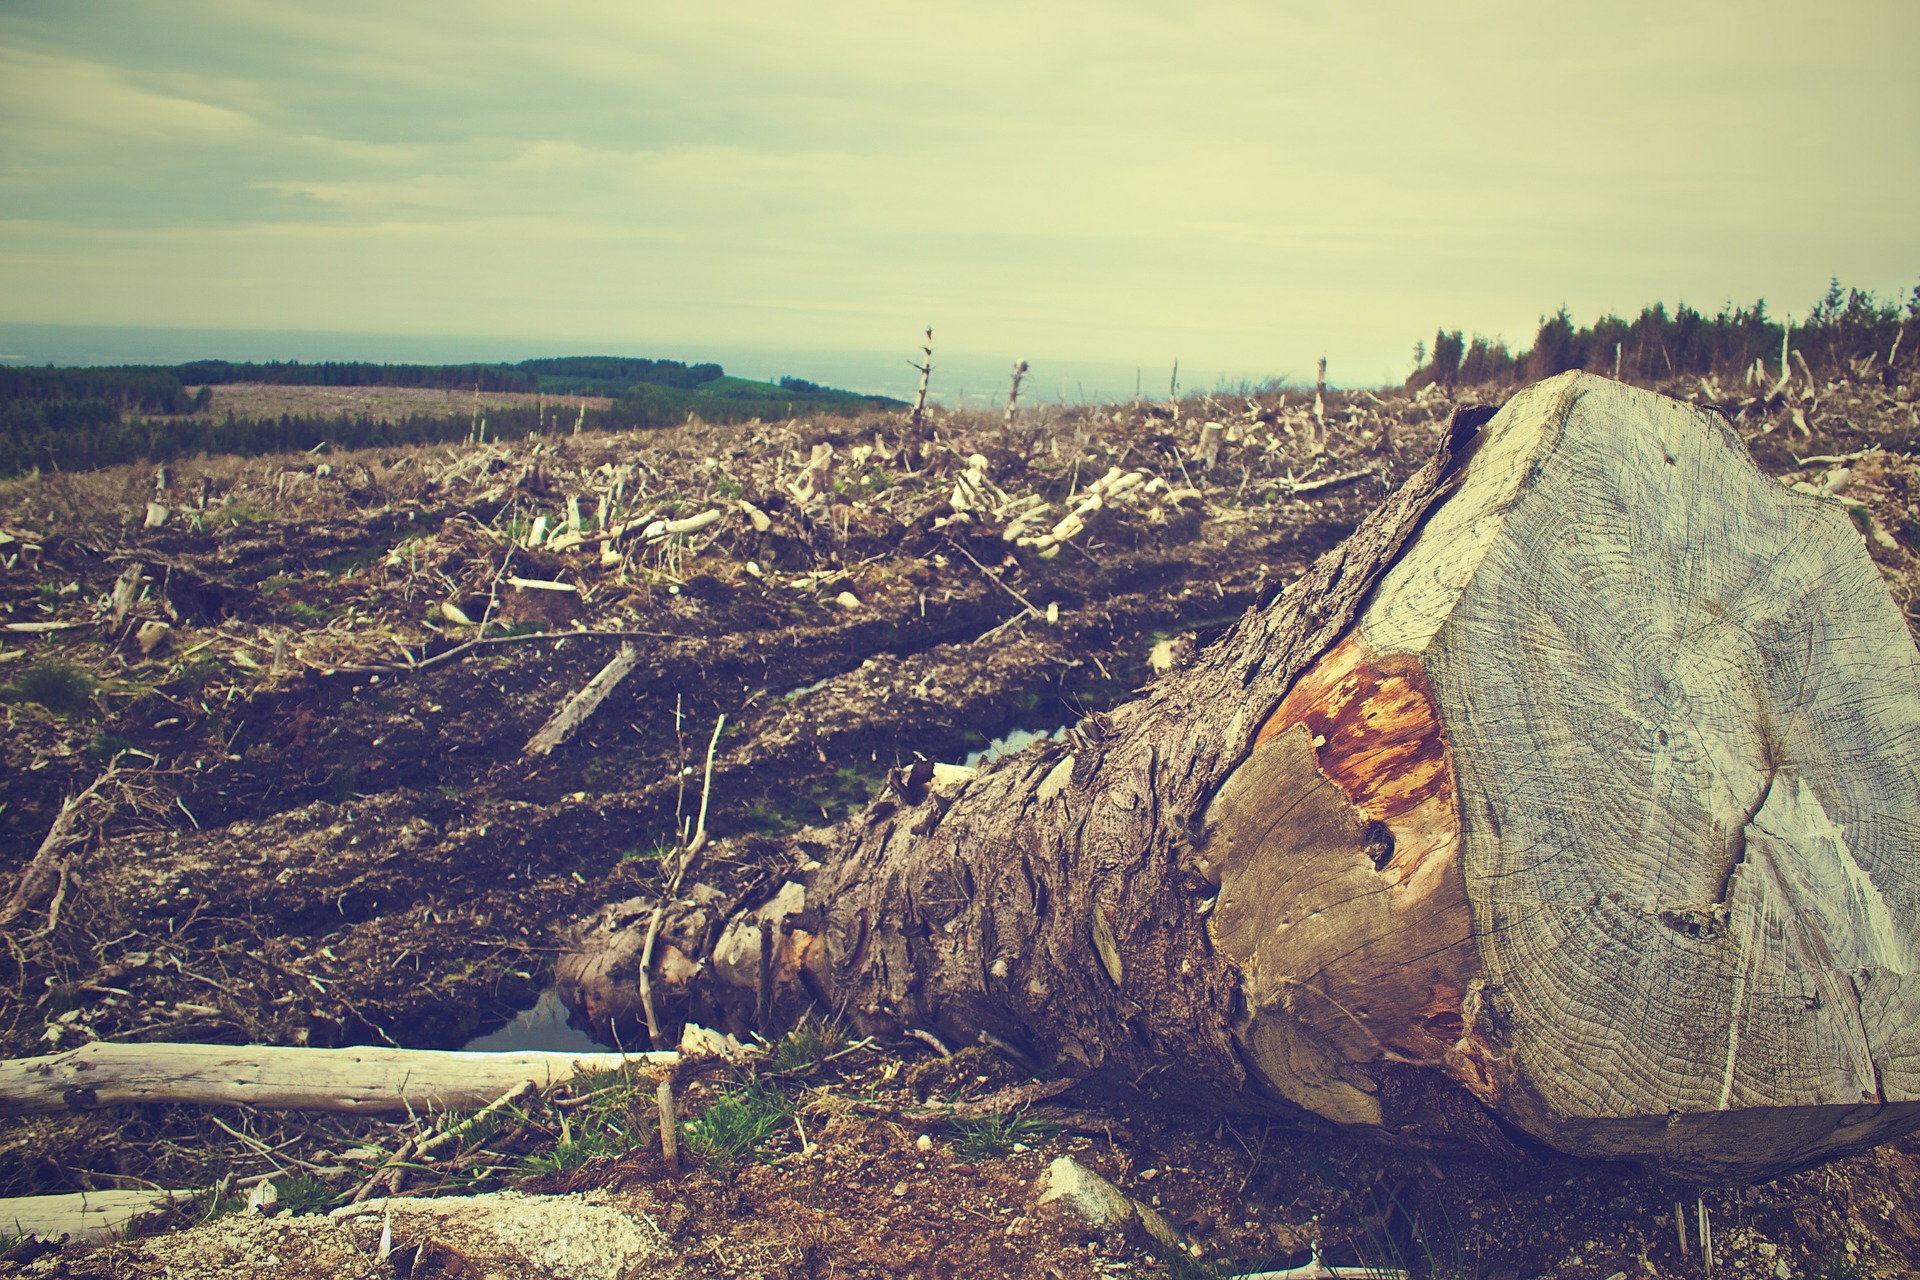 What is going to be the long term impact of deforestation?